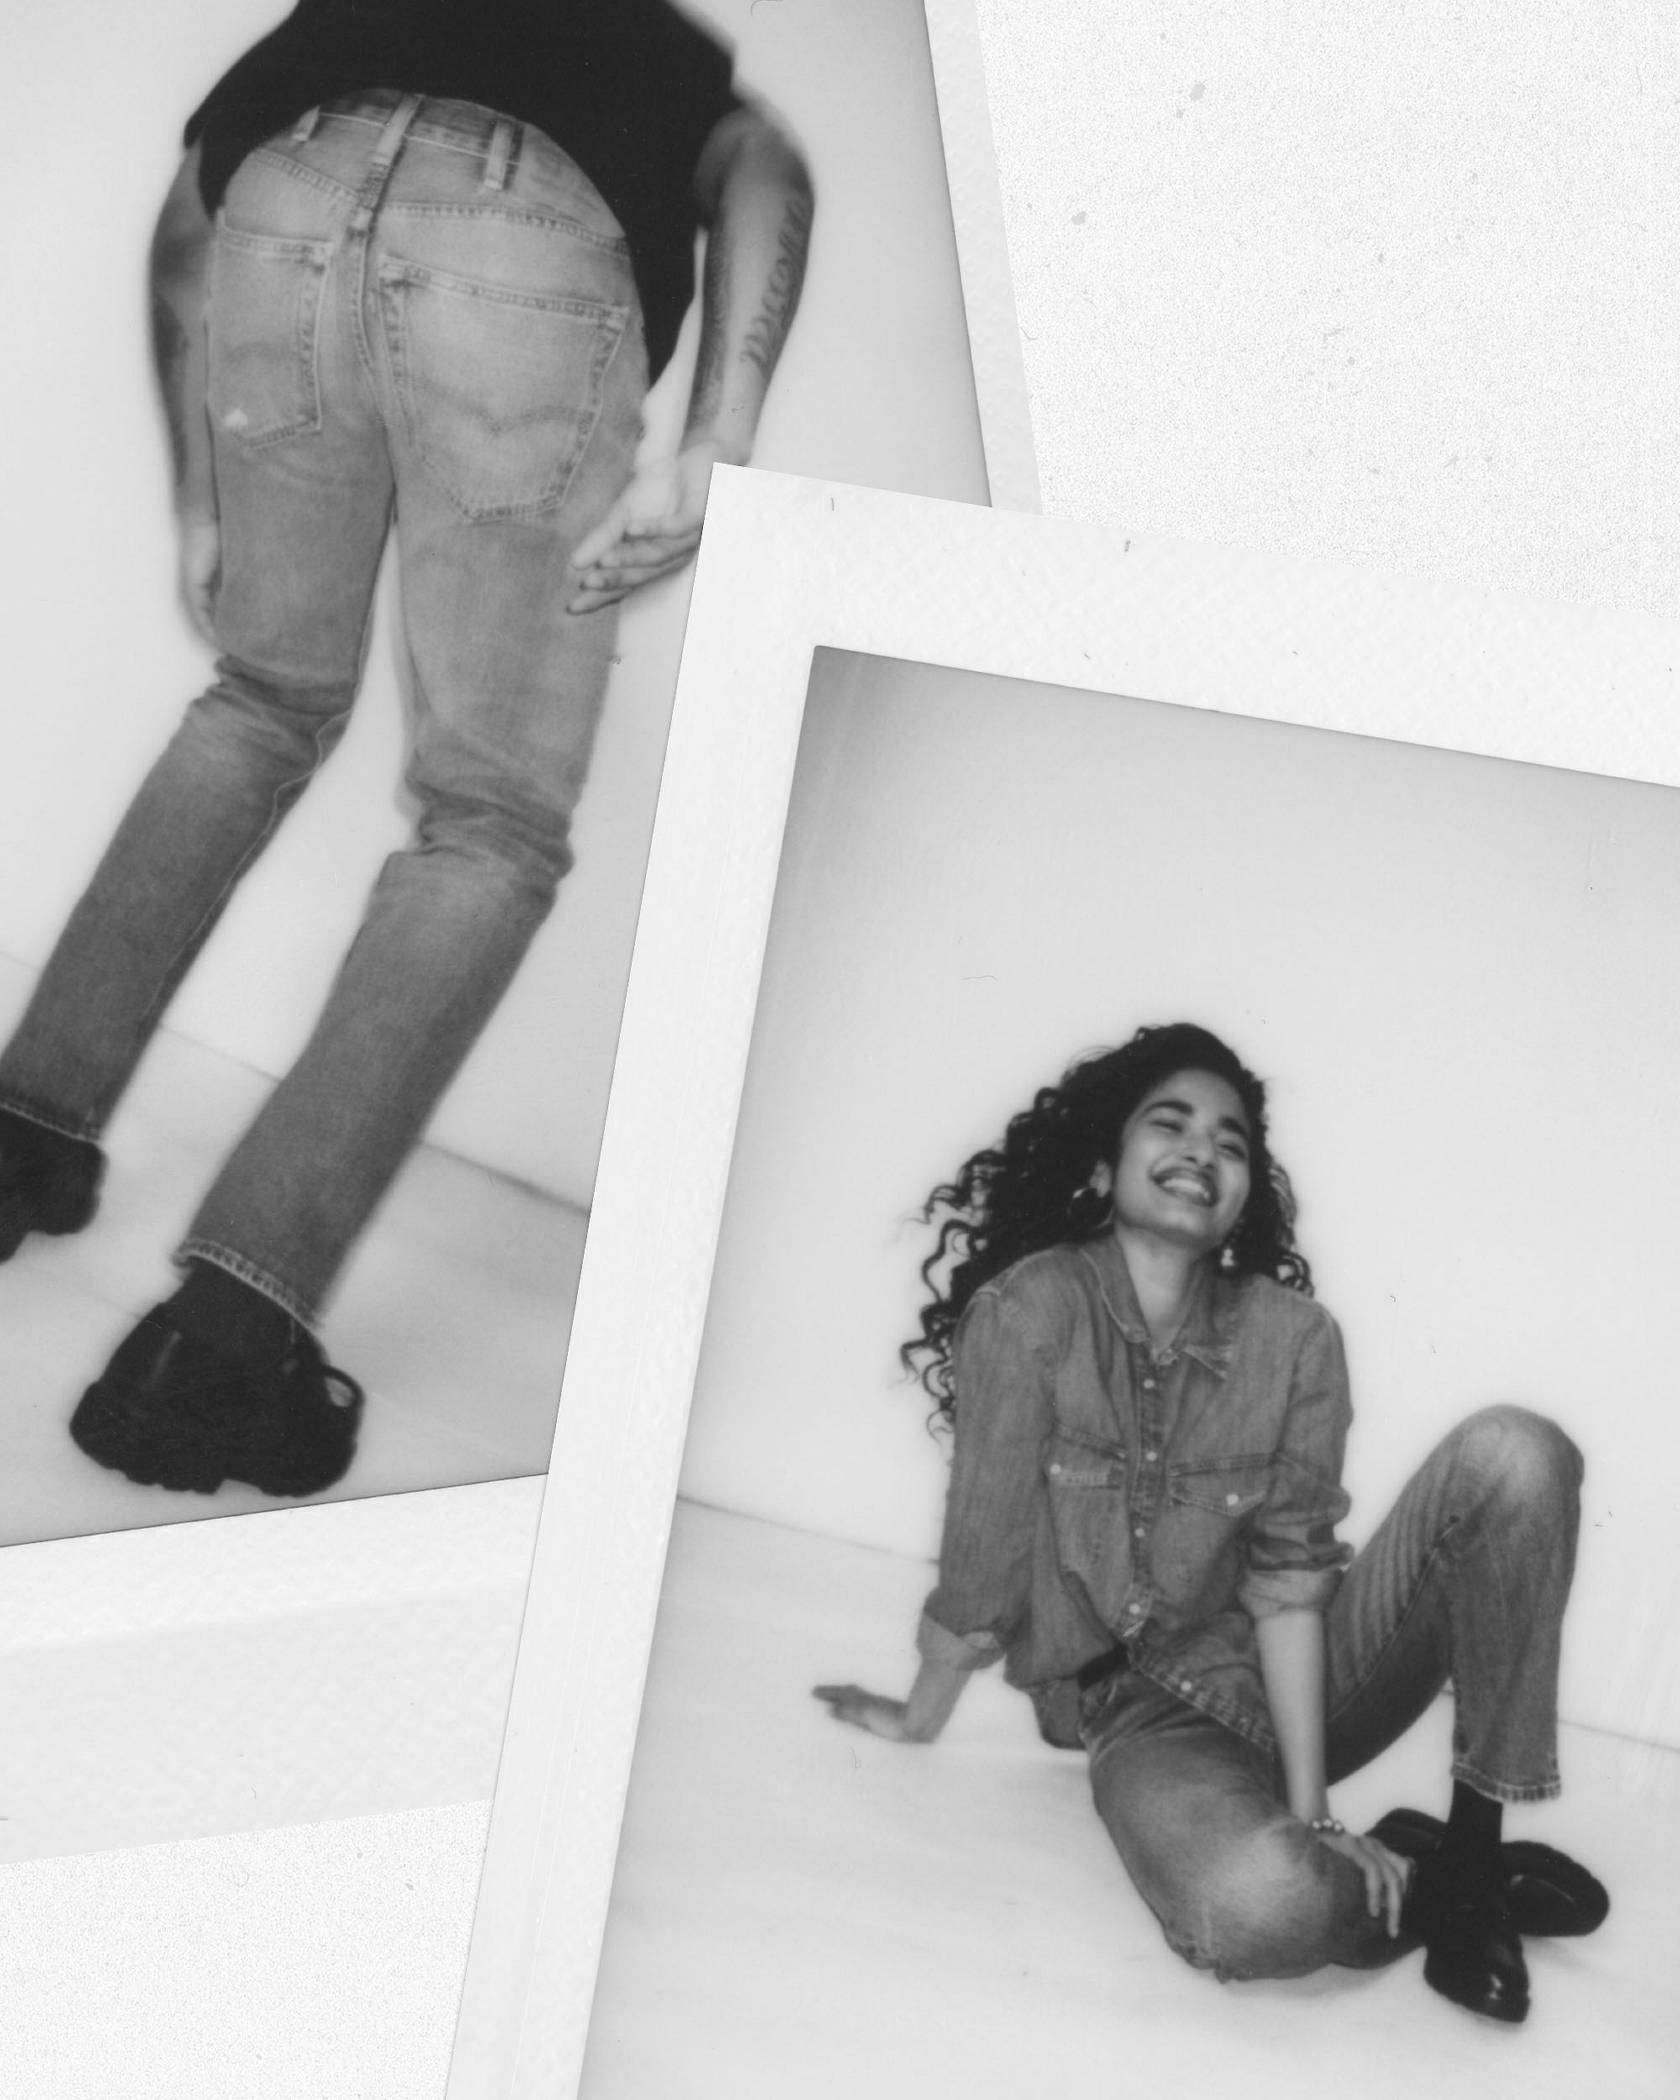 Black and white polaroid pictures of models in men and women's straight cut jeans